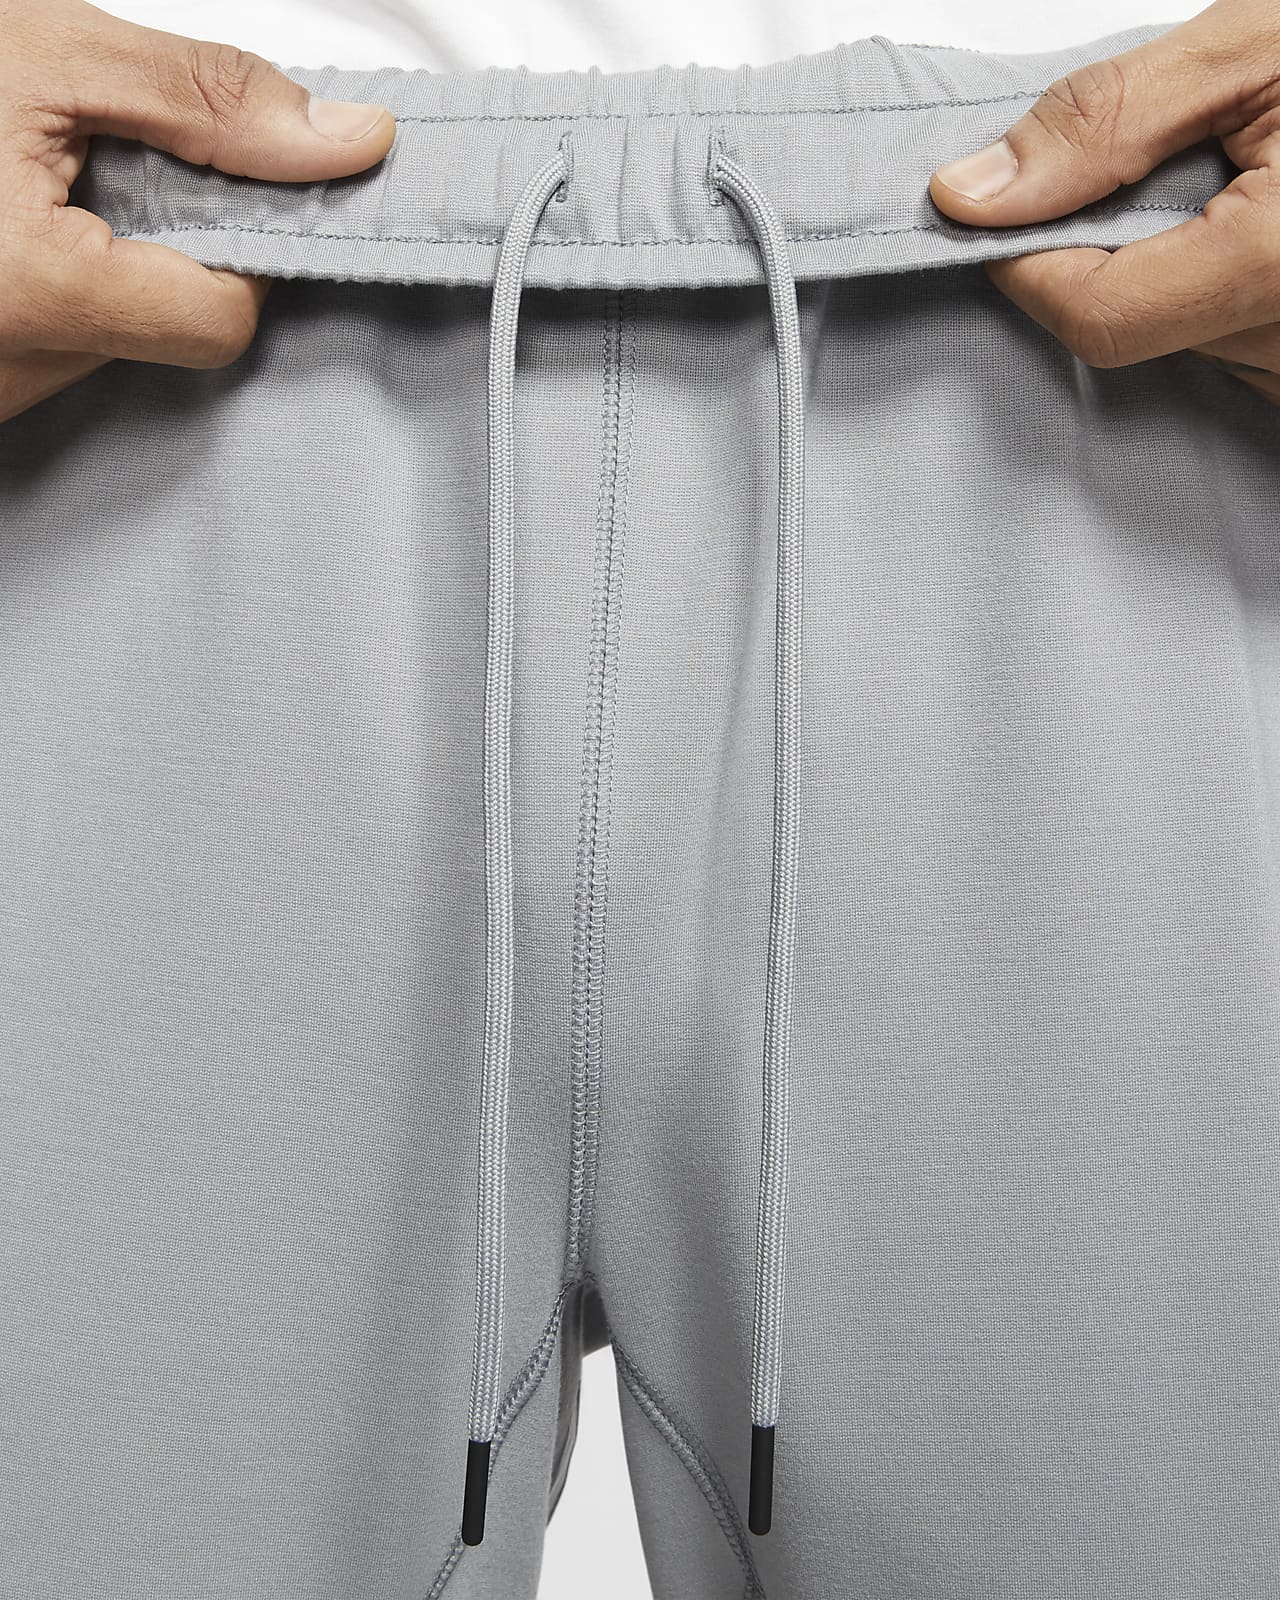 mens nike joggers with zipper pockets